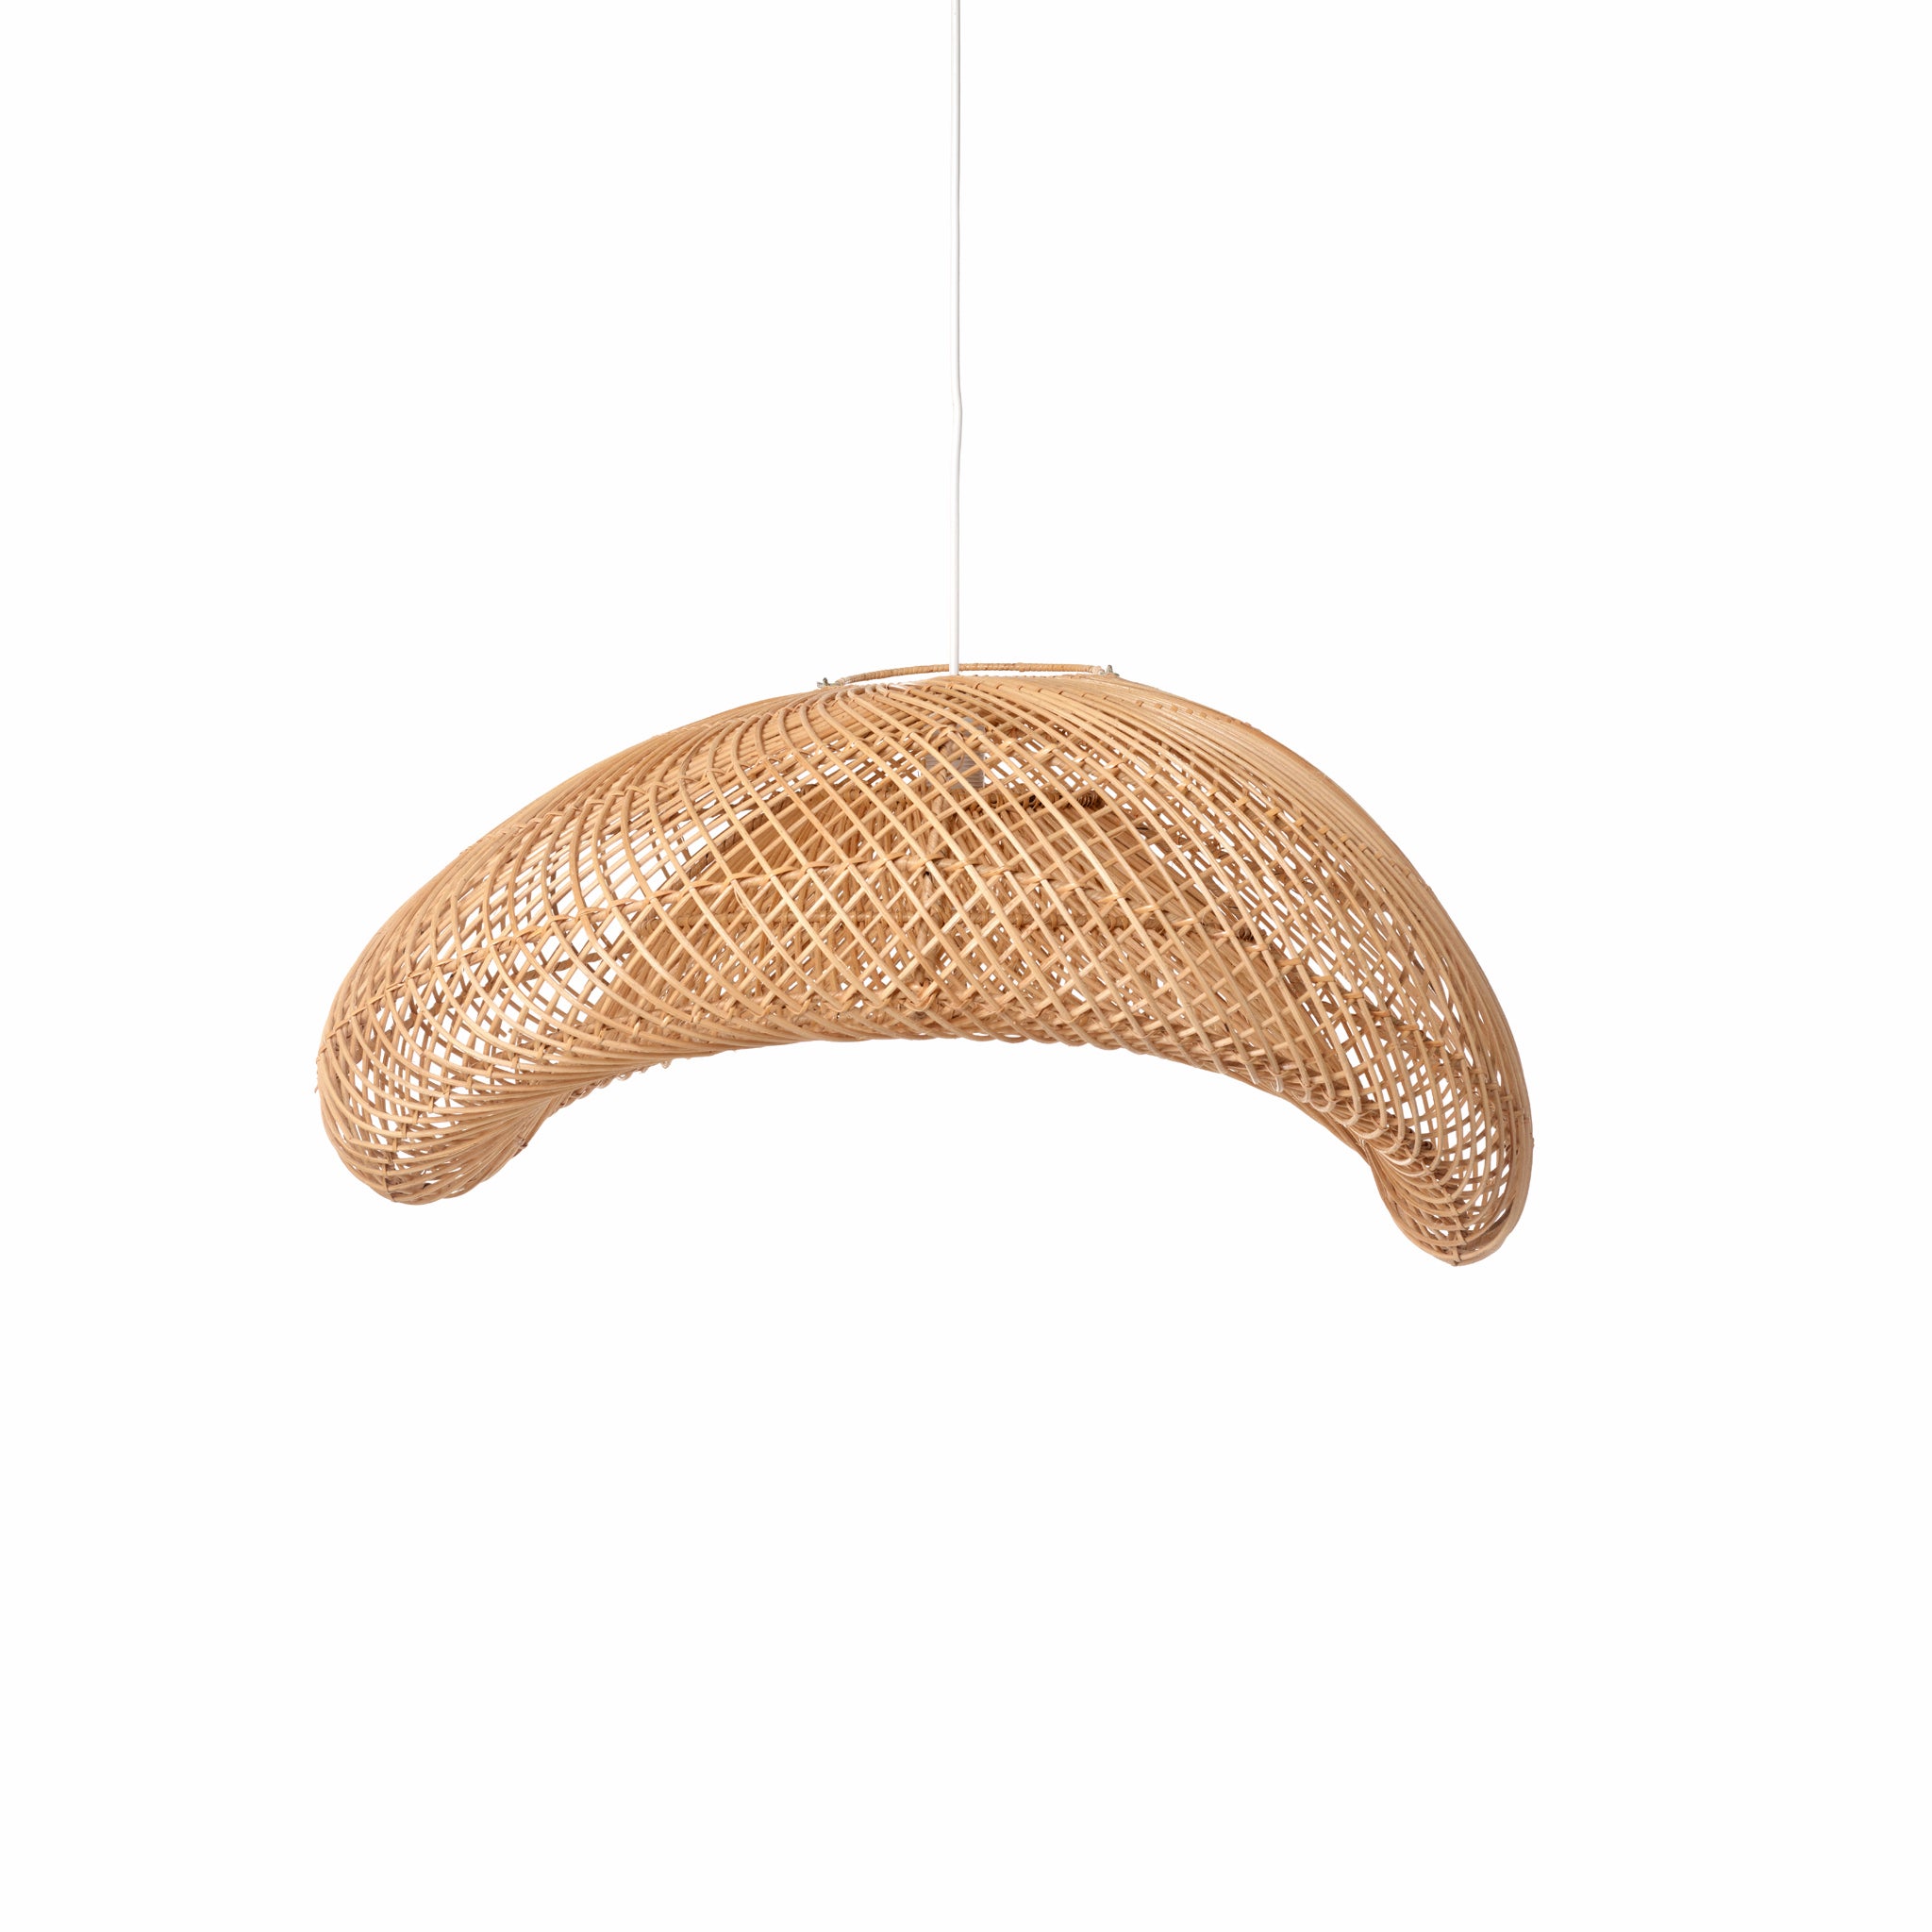 Rattan Wavy Arch Pedant Ceiling Light Home Decorations Made in Indonesia